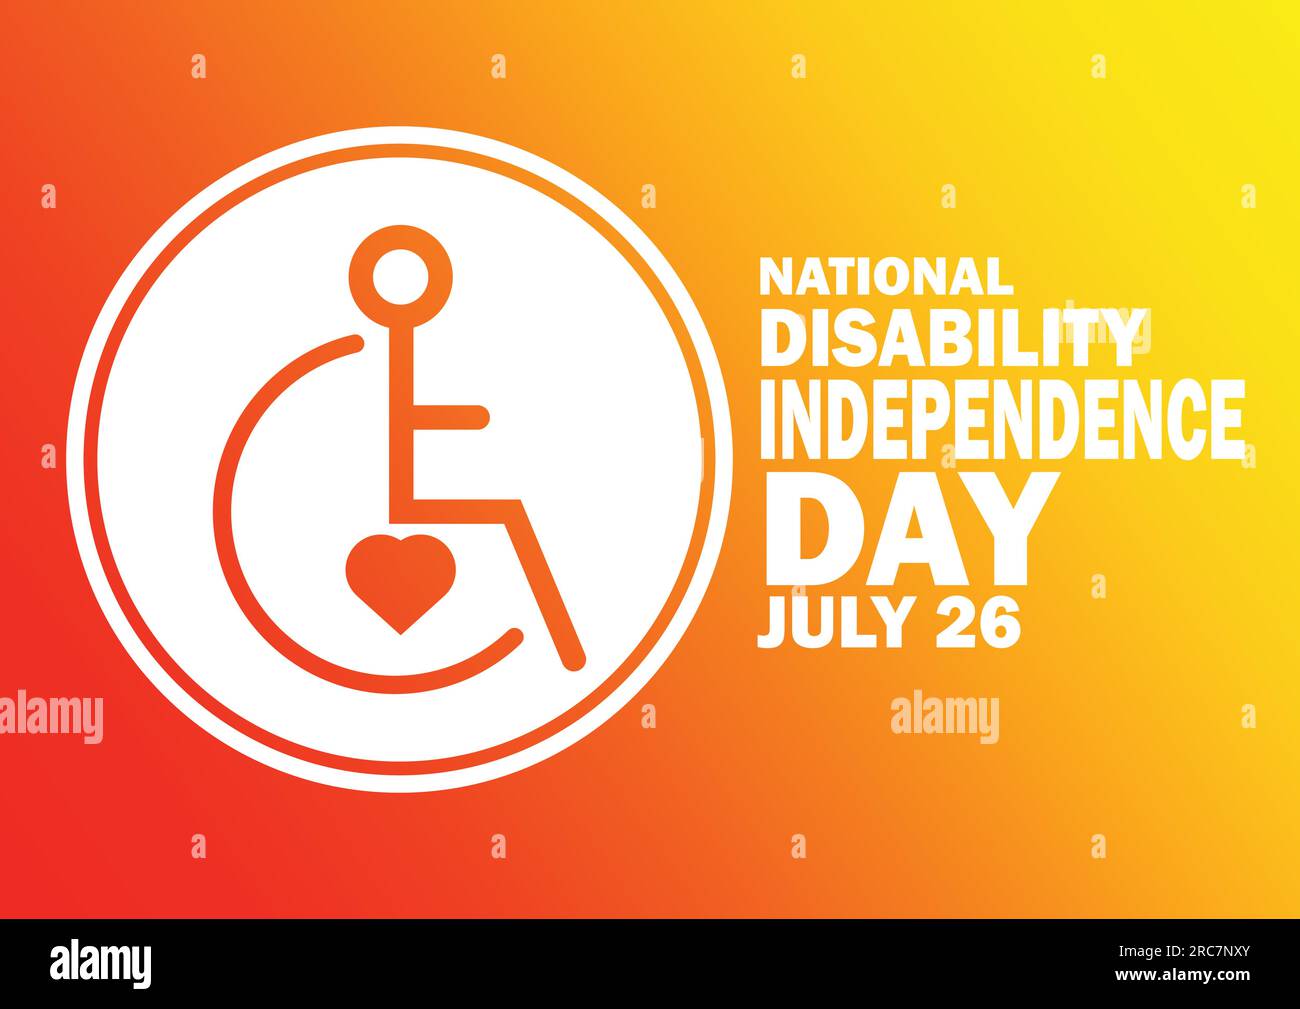 National Disability Independence Day Vector illustration. July 26. Holiday concept. Template for background, banner, card, poster Stock Vector